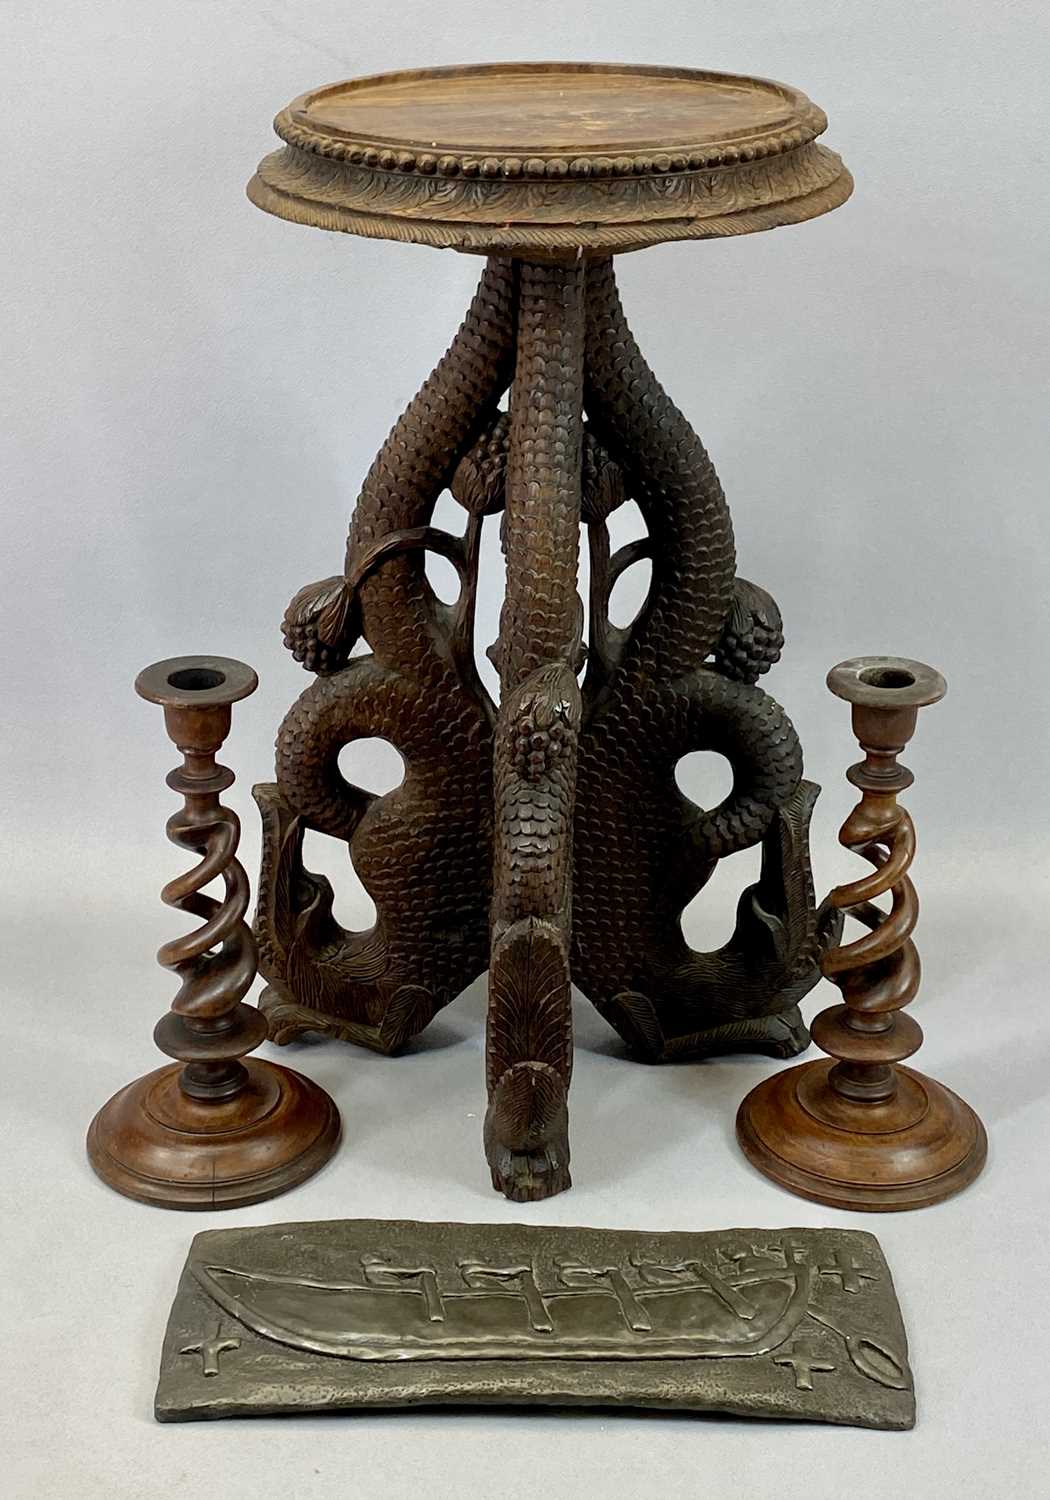 EASTERN HARDWOOD CARVED FISH TRIPOD TABLE, 52cms tall, a pair of open twist treen candlesticks,